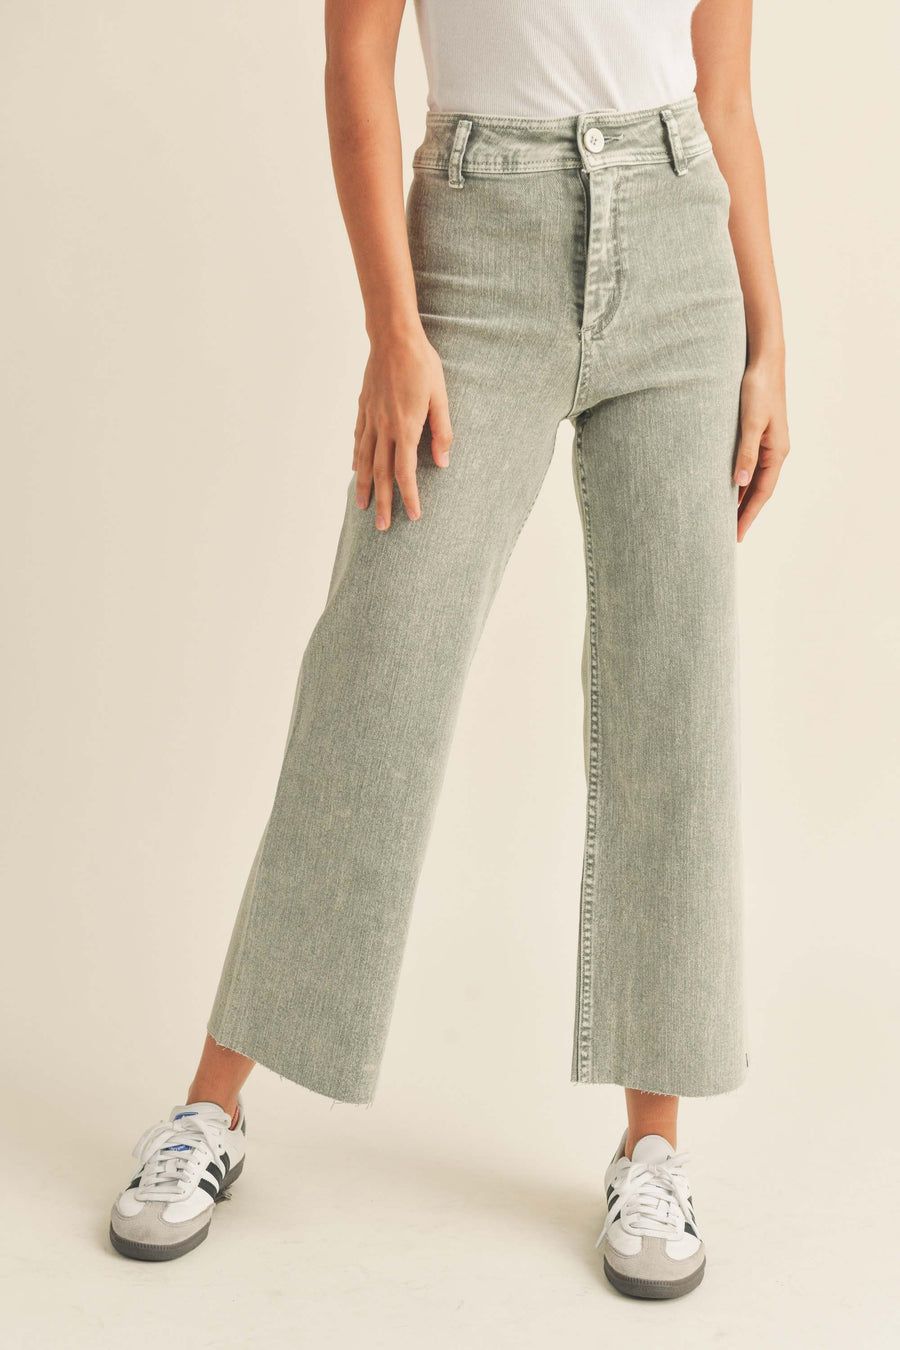 Sage cropped pants with belt loops and highwaisted fit. 